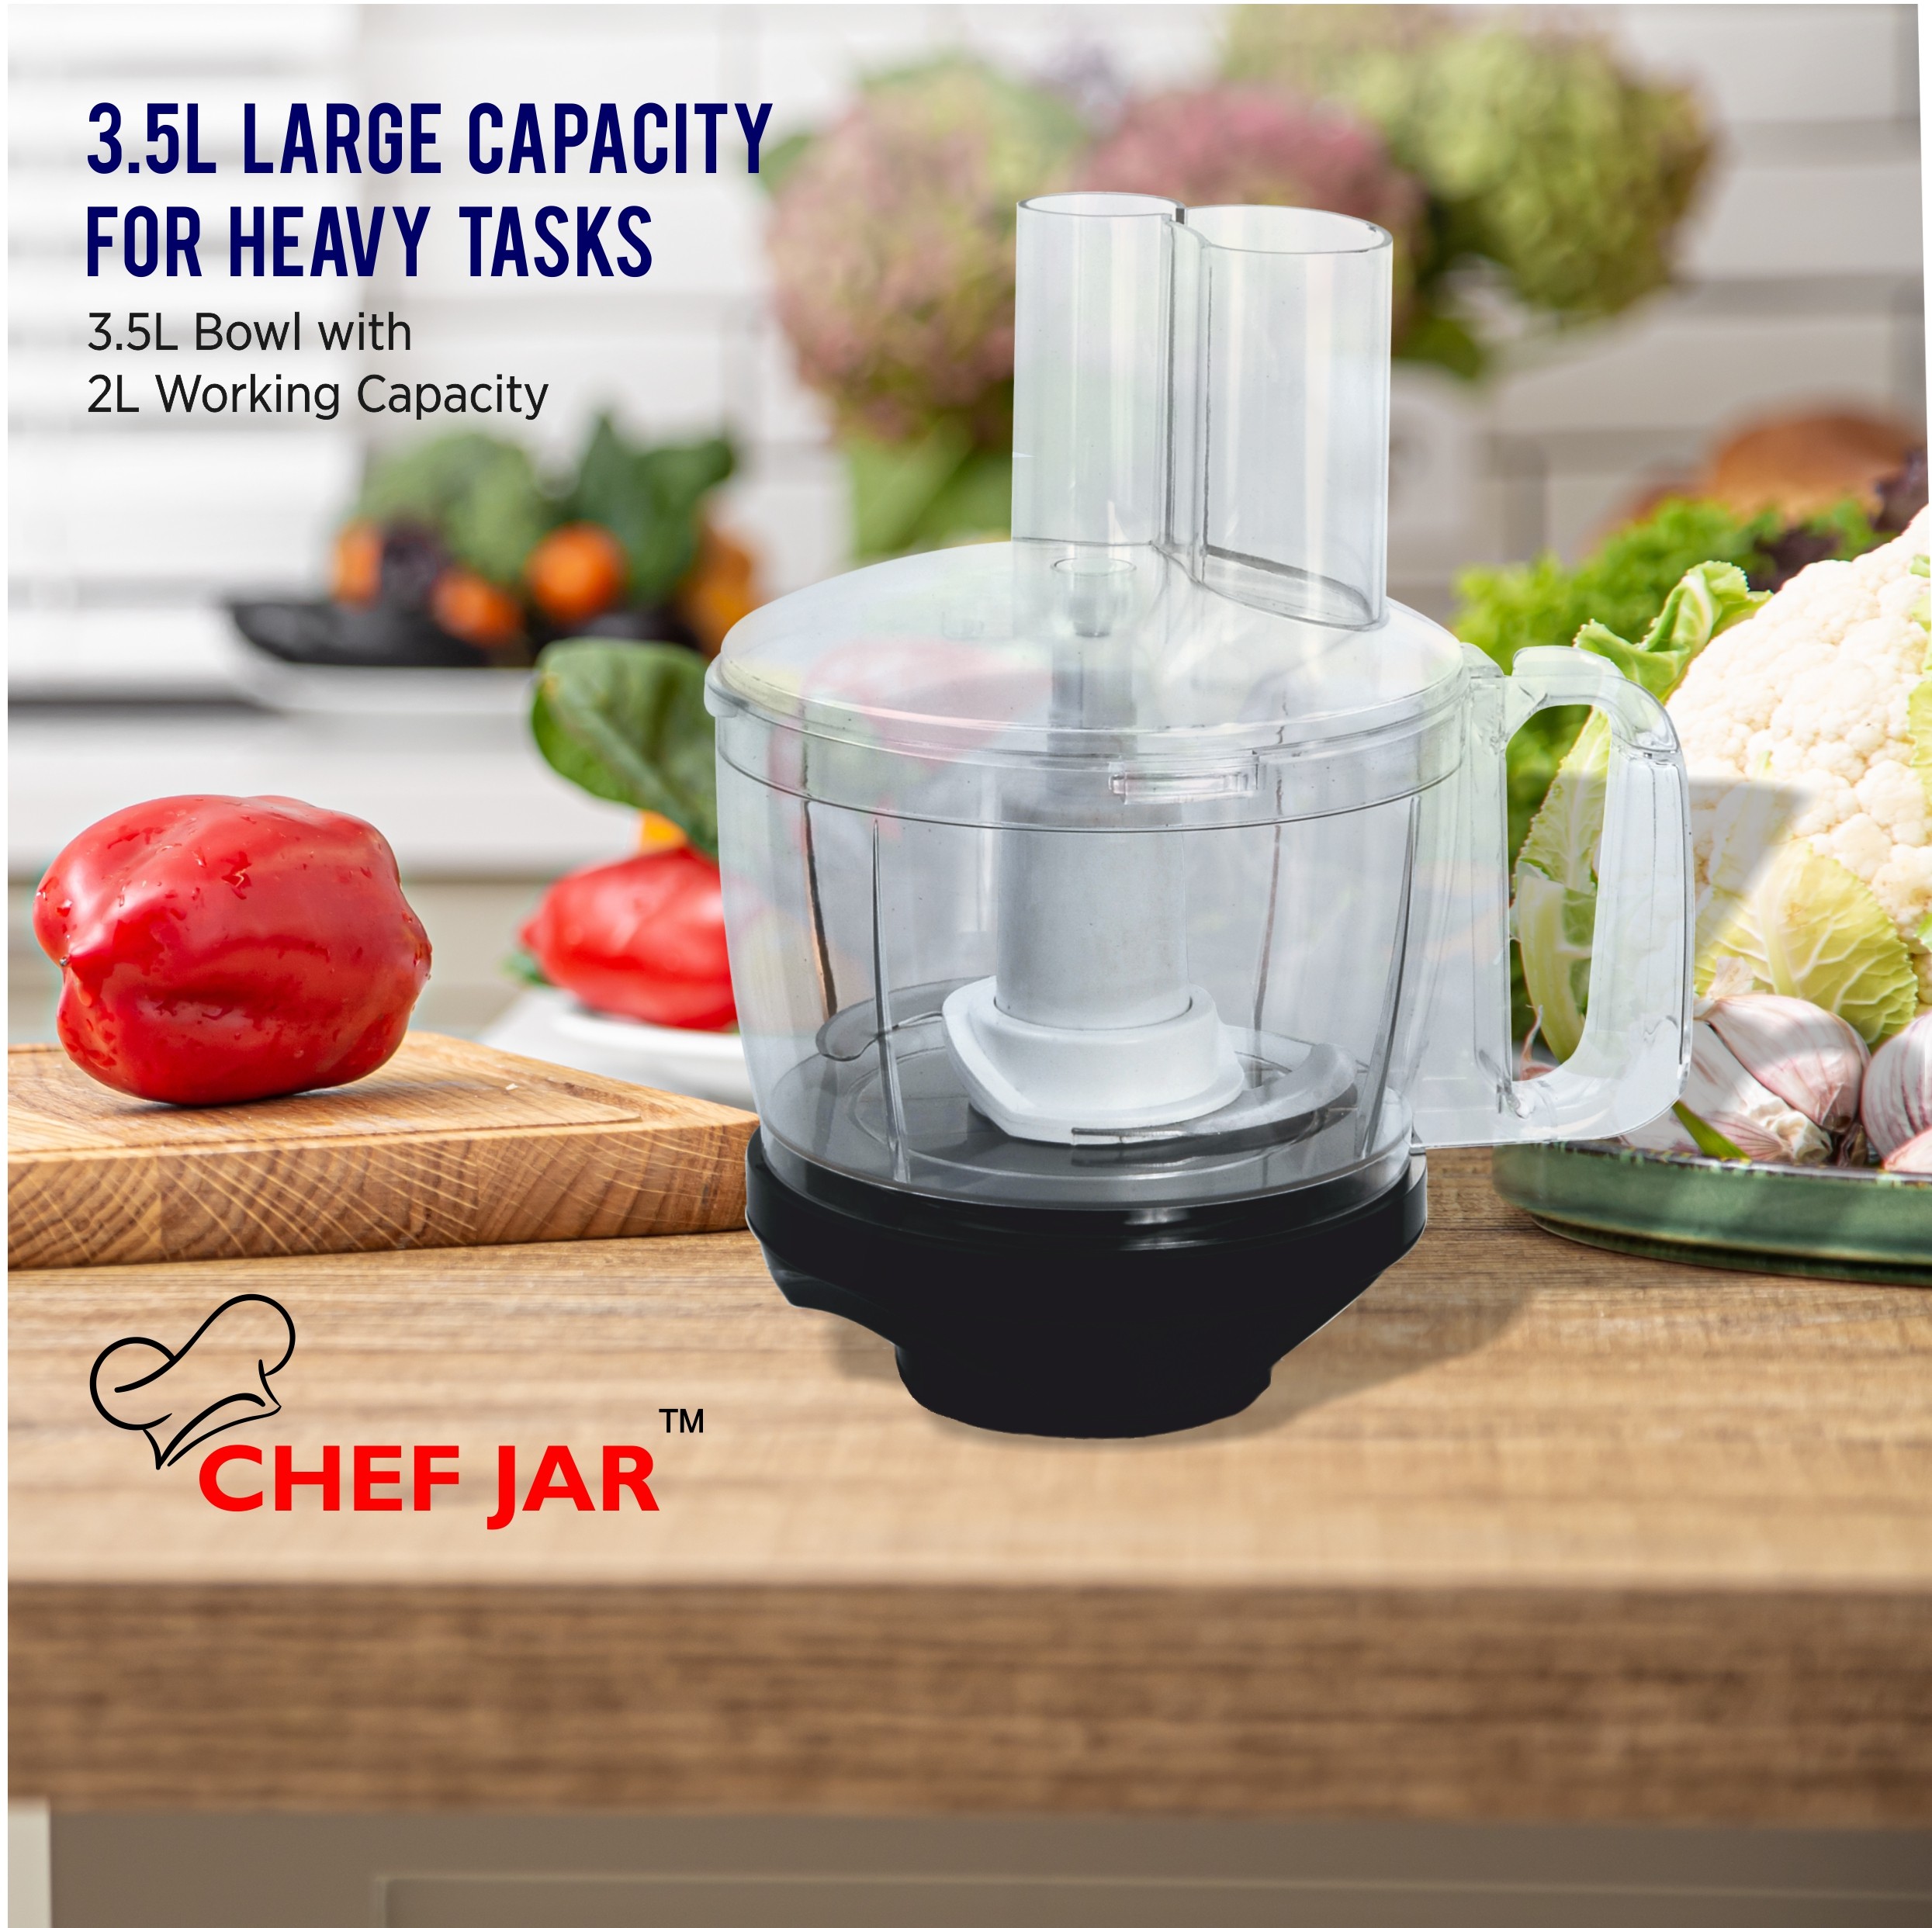 chef-jar-all-in-one-a-complete-food-processor-attachment-for-most-indian-mixer-grinders1